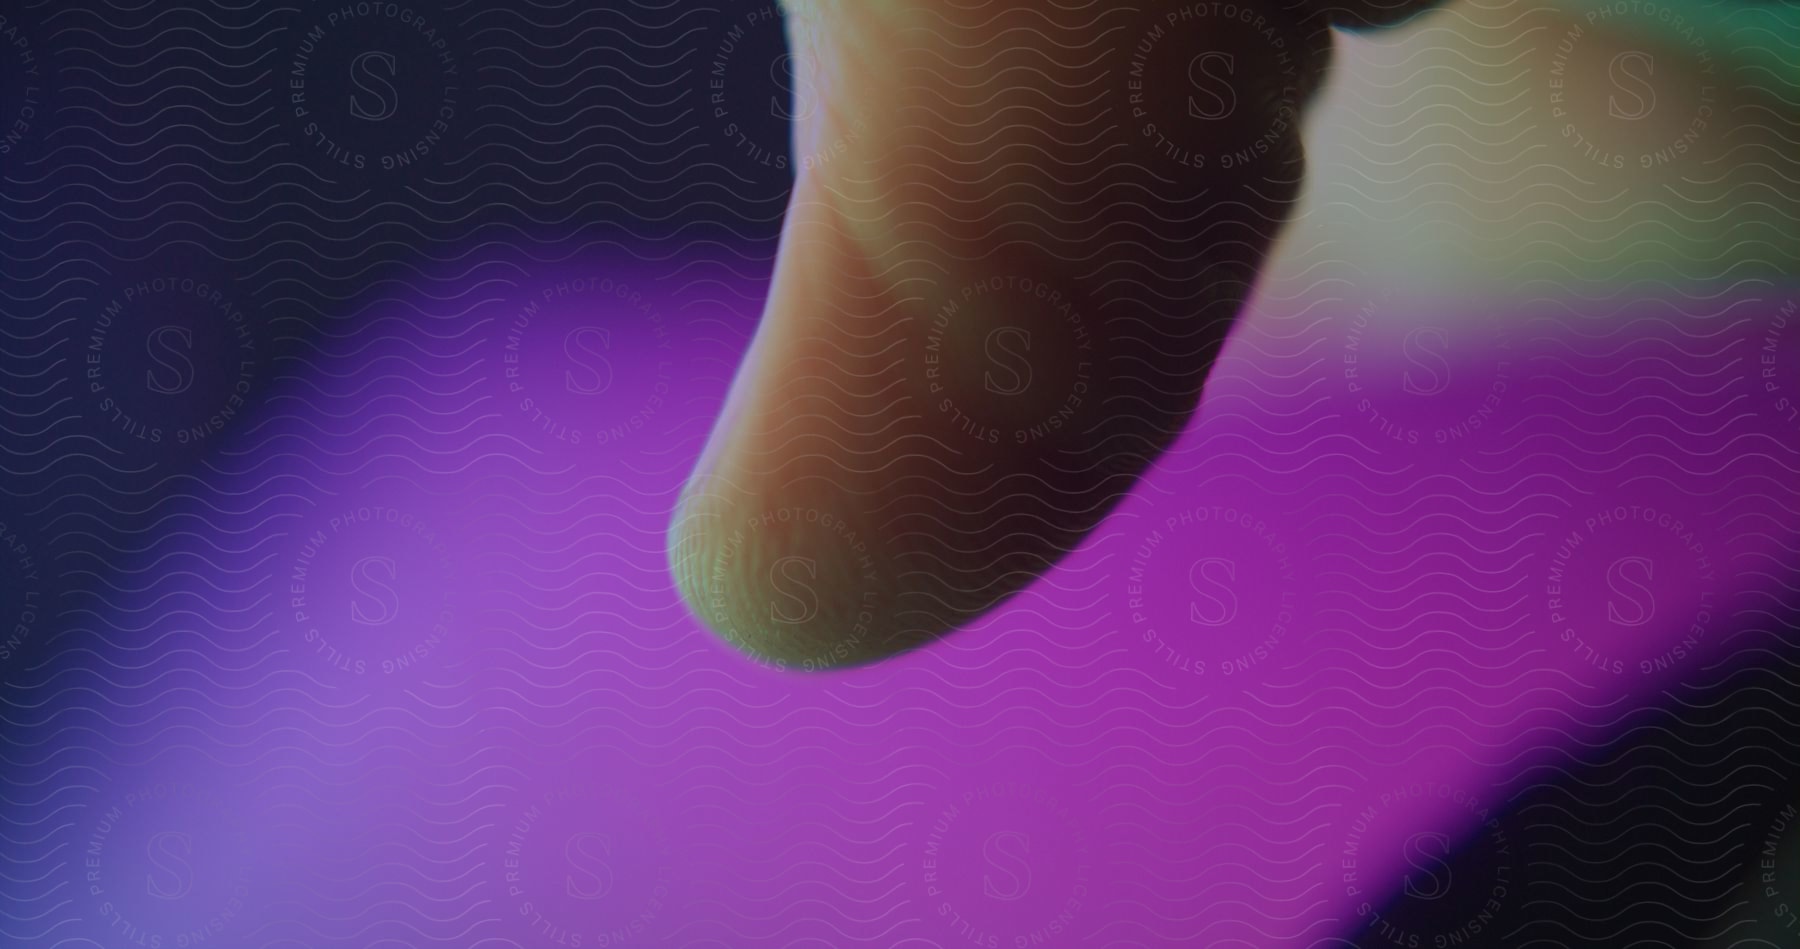 A close-up of a finger touching a phone screen.